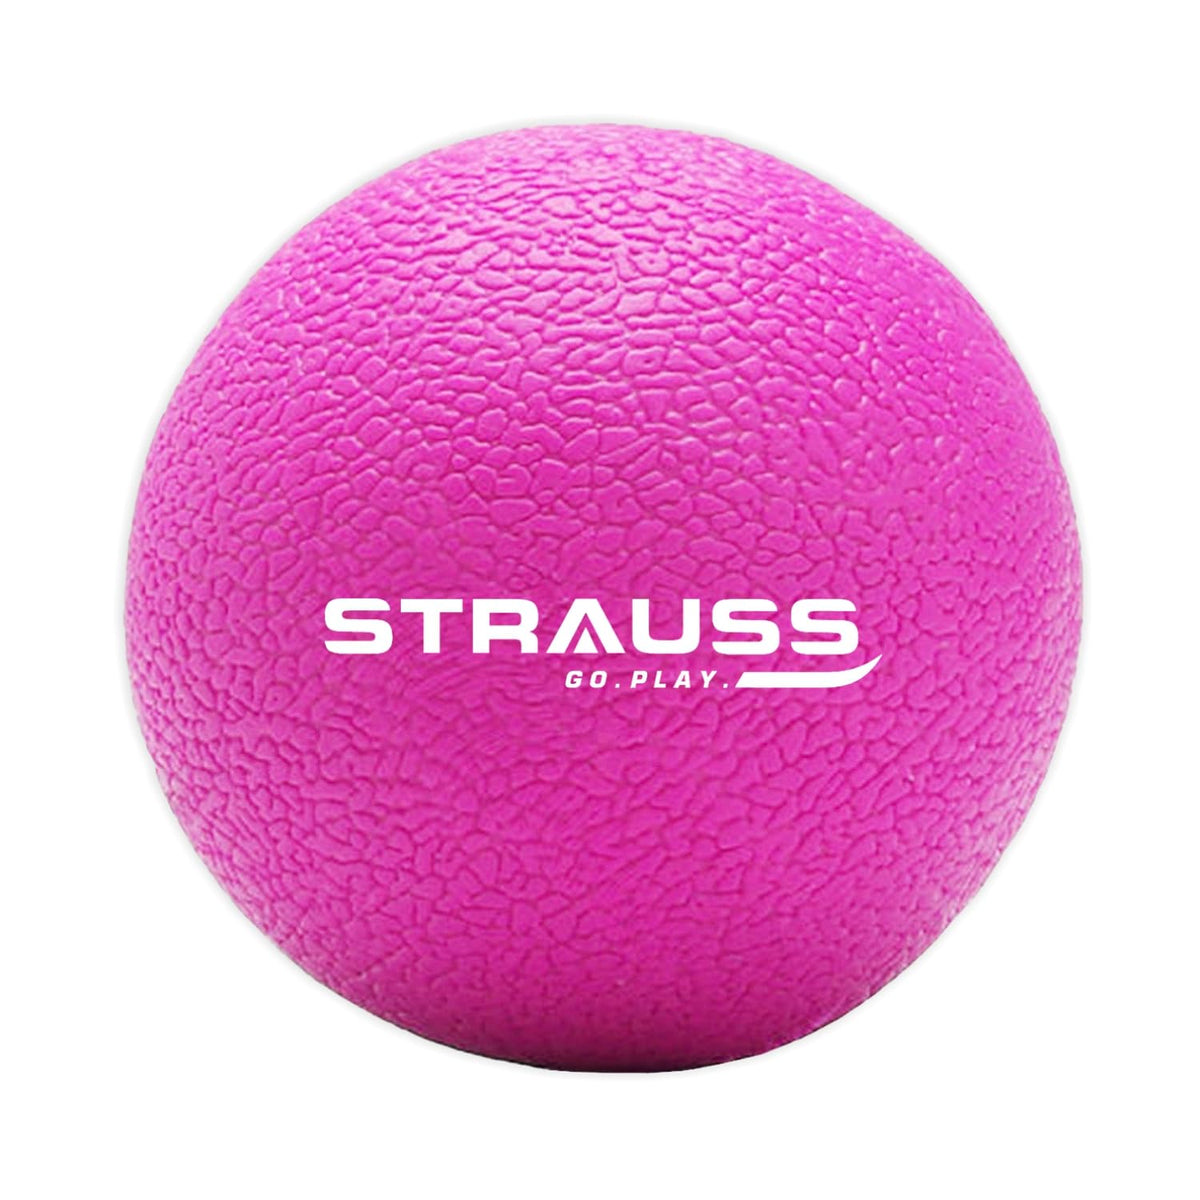 Strauss Yoga Massage Ball for Deep Tissue Massage & Trigger Point Therapy|High-Density Acupressure Ball |Ideal for Yoga,Pilates, Fitness |Portable Self-Massage Tool for Sore Muscles & Recovery,(Pink)